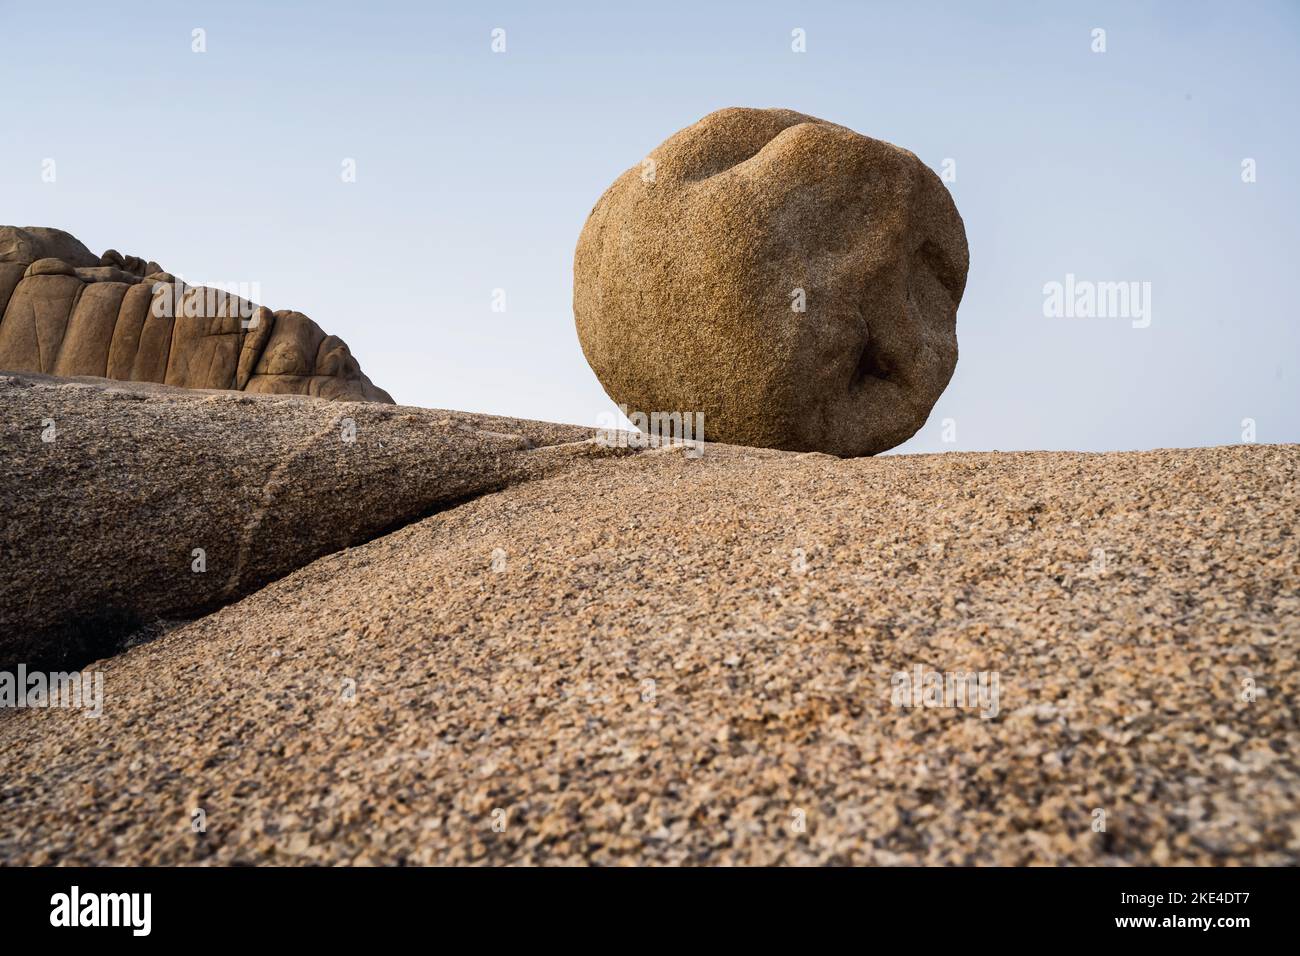 An almost circular rock lies like a ball on a rock plateau against a blue sky. Stock Photo